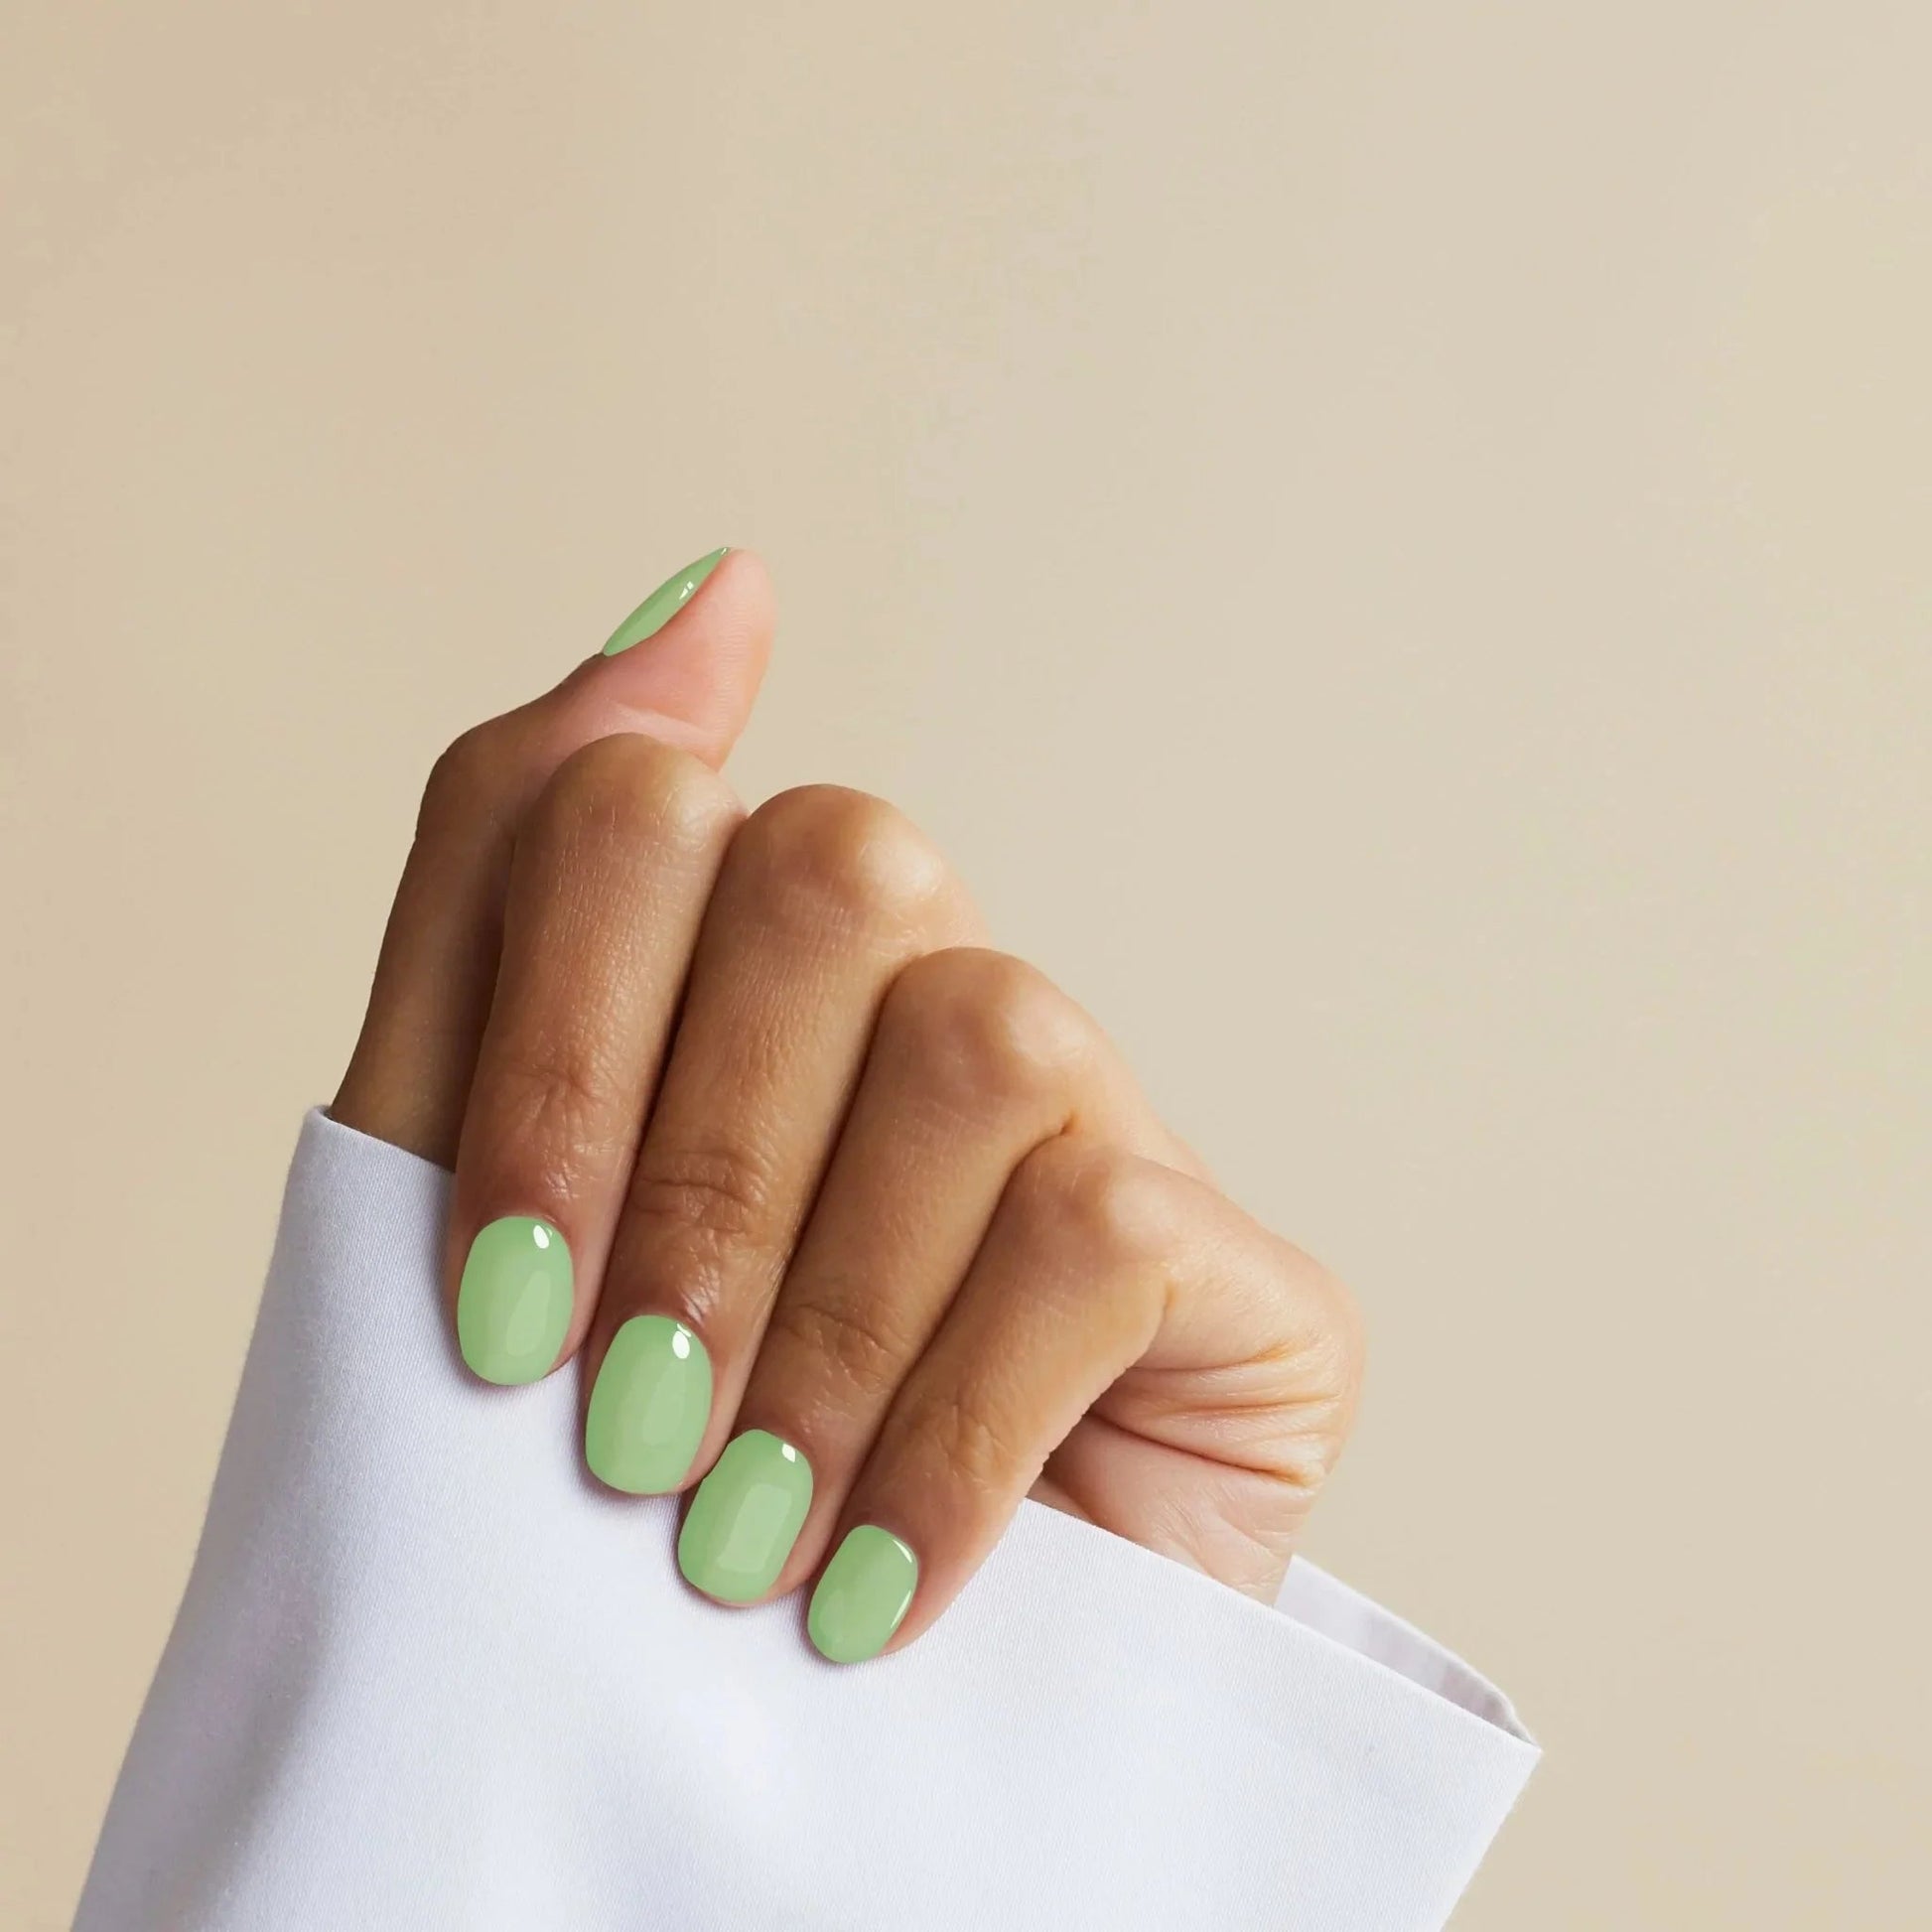 Minted - Gel Polish - 14 Day Manicure - On Hand